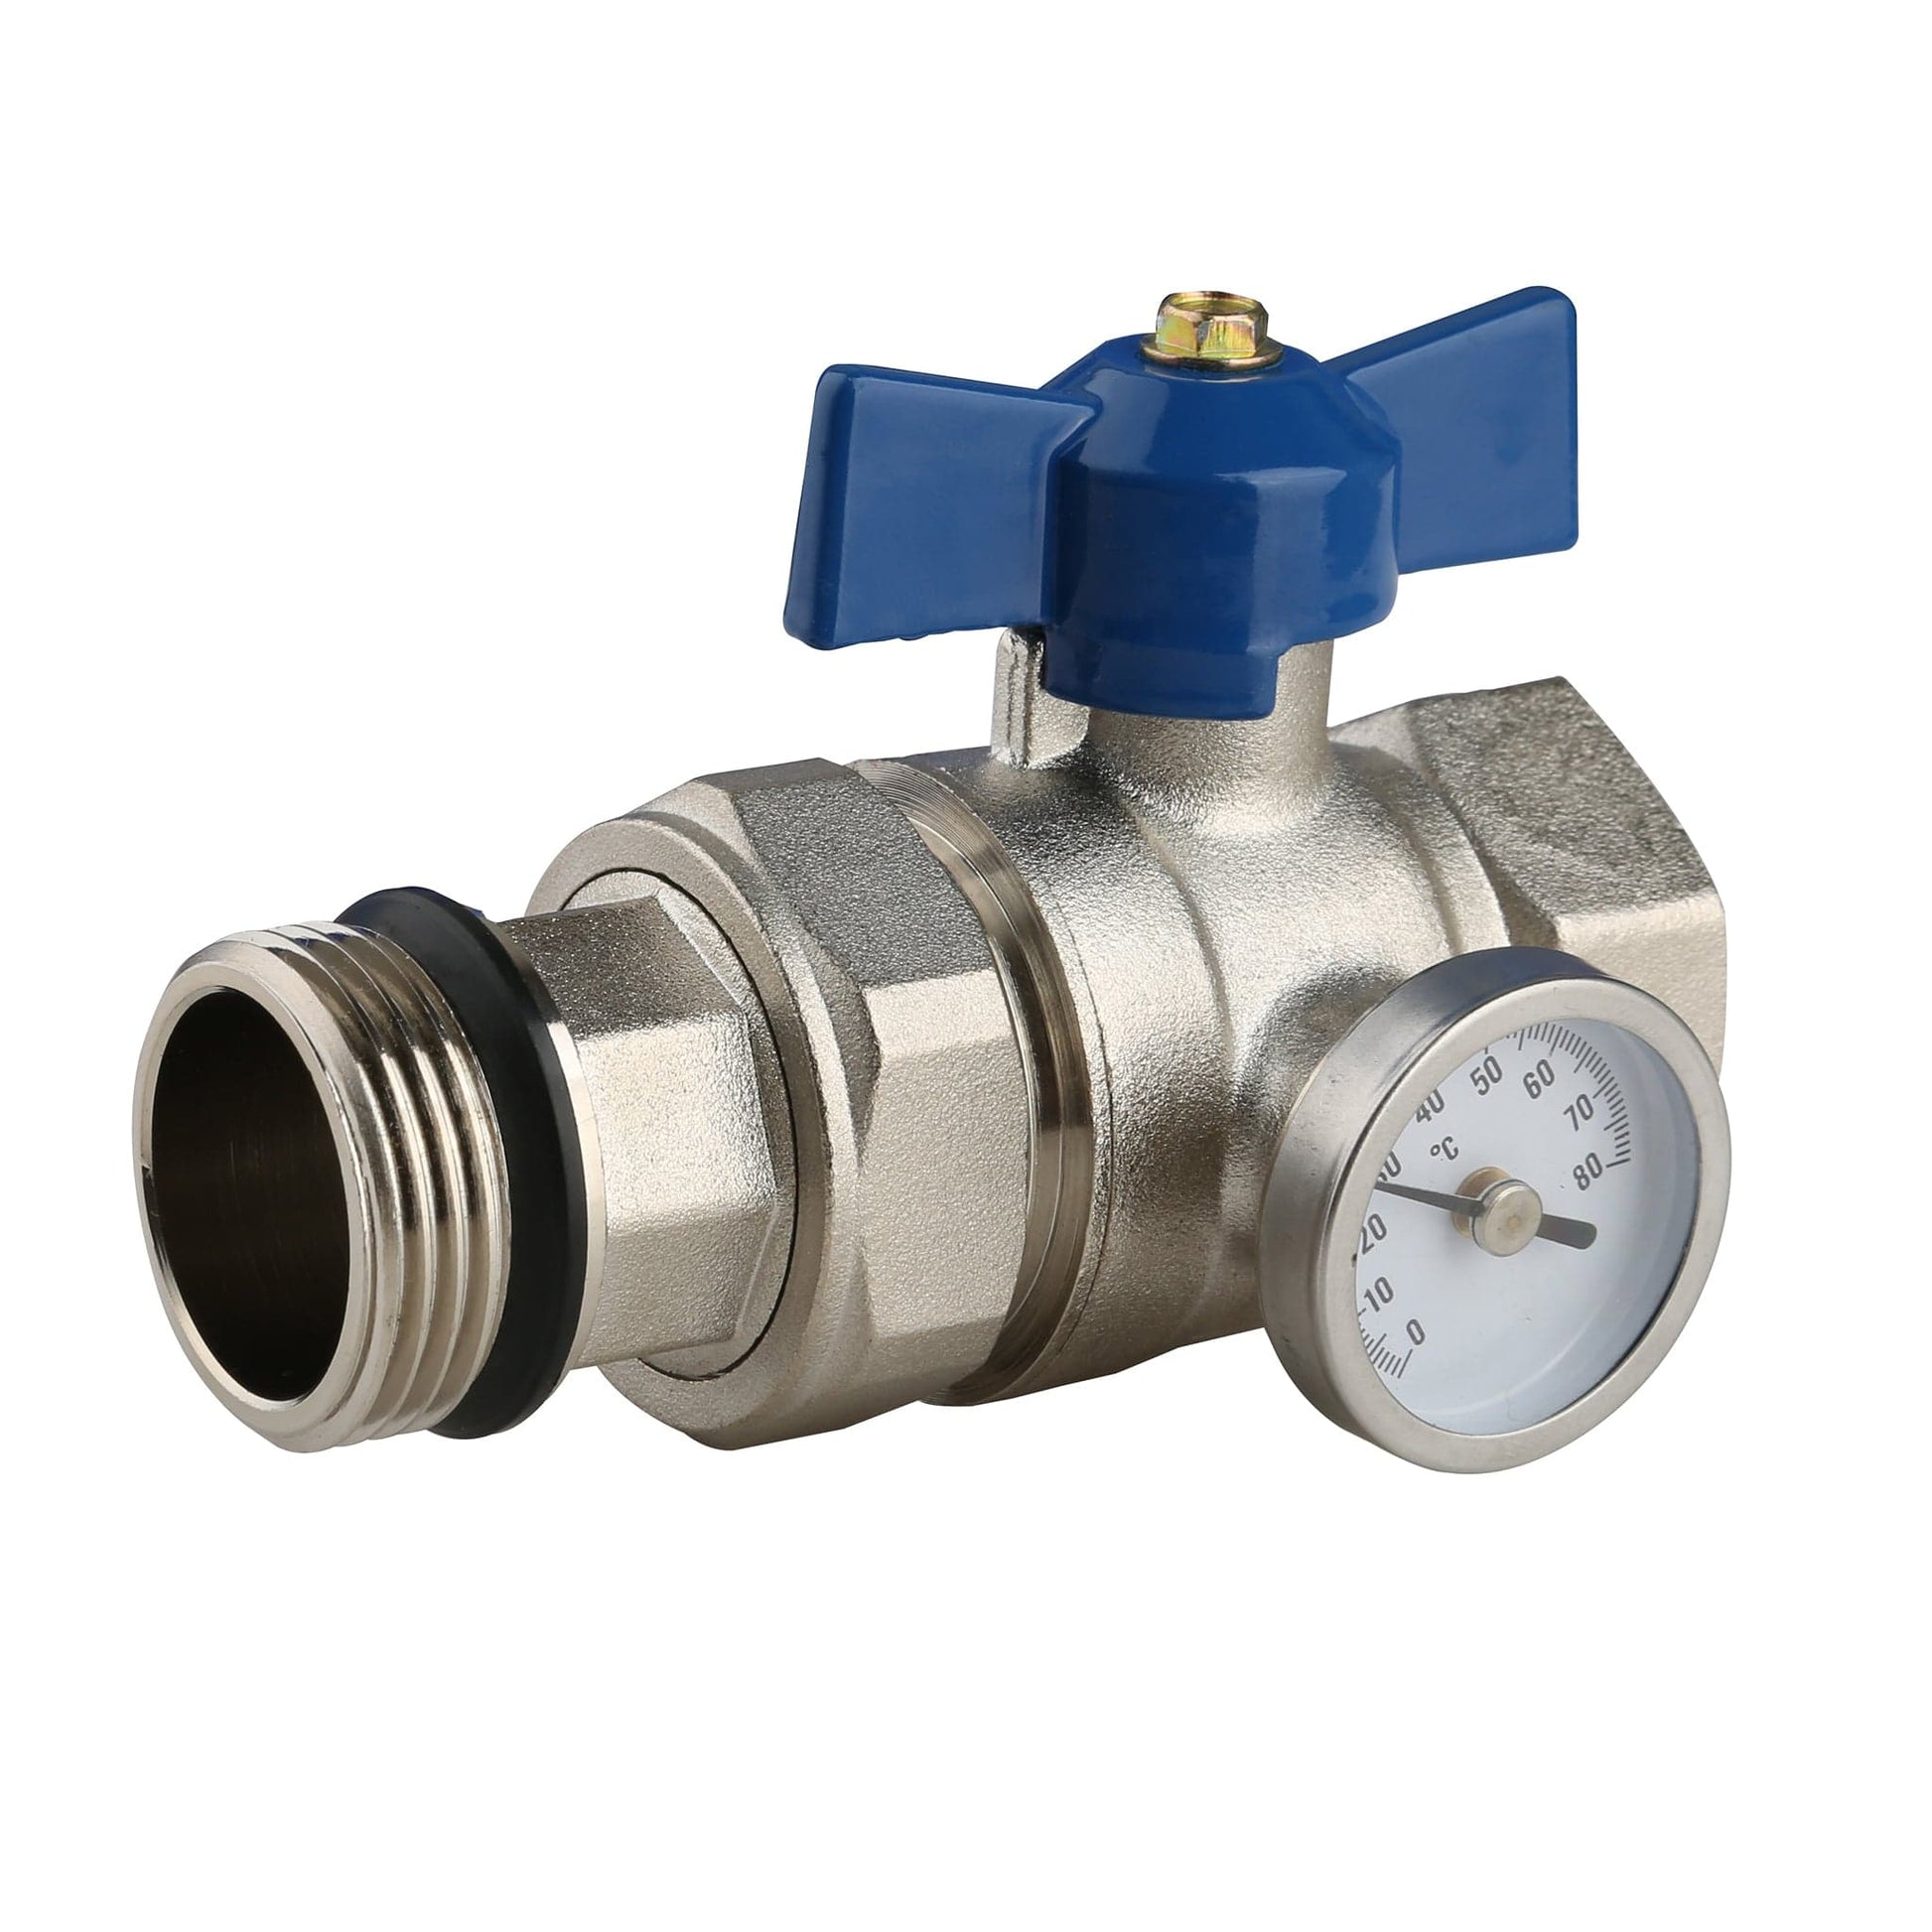 Pair of 1" Isolation Ball Valves With Temp Gauges | ZL-4012 BM01628